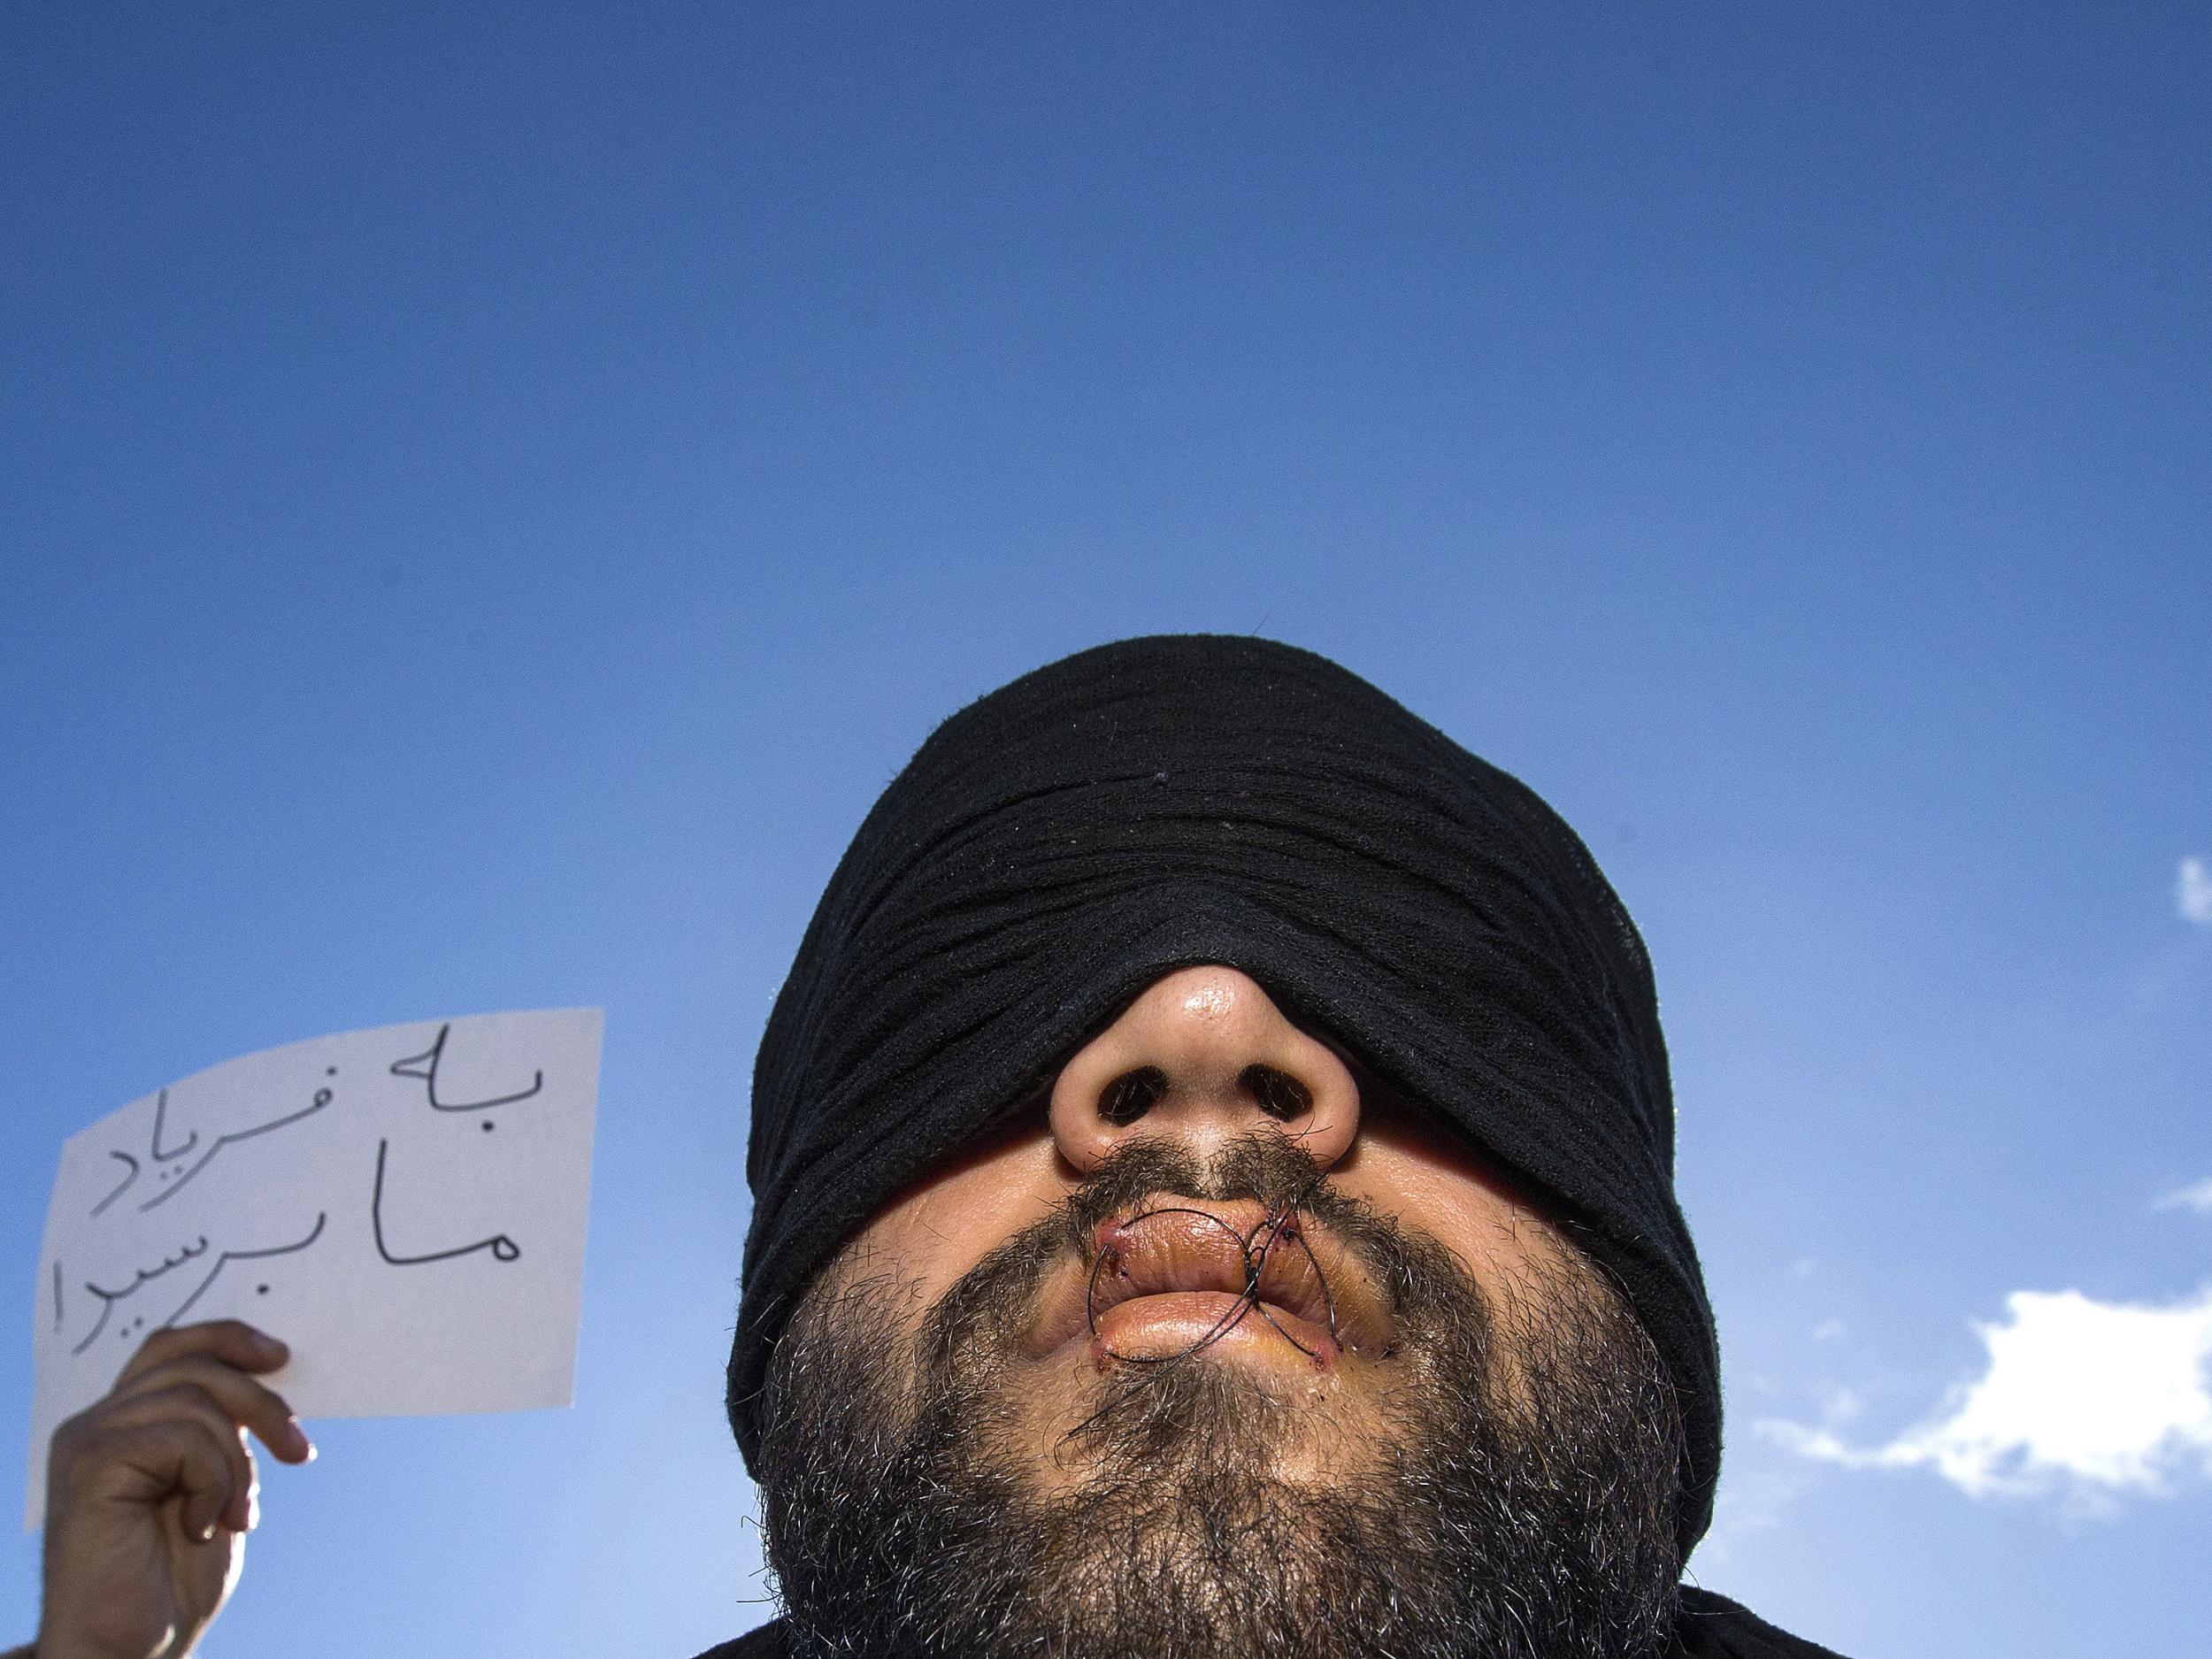 A placard reading " Why don't you listen to us" is seen behind a Iranian migrant, his lips sewn shut and making an hunger strike, during the dismantlement of the shanty town called the "Jungle" in Calais, France.